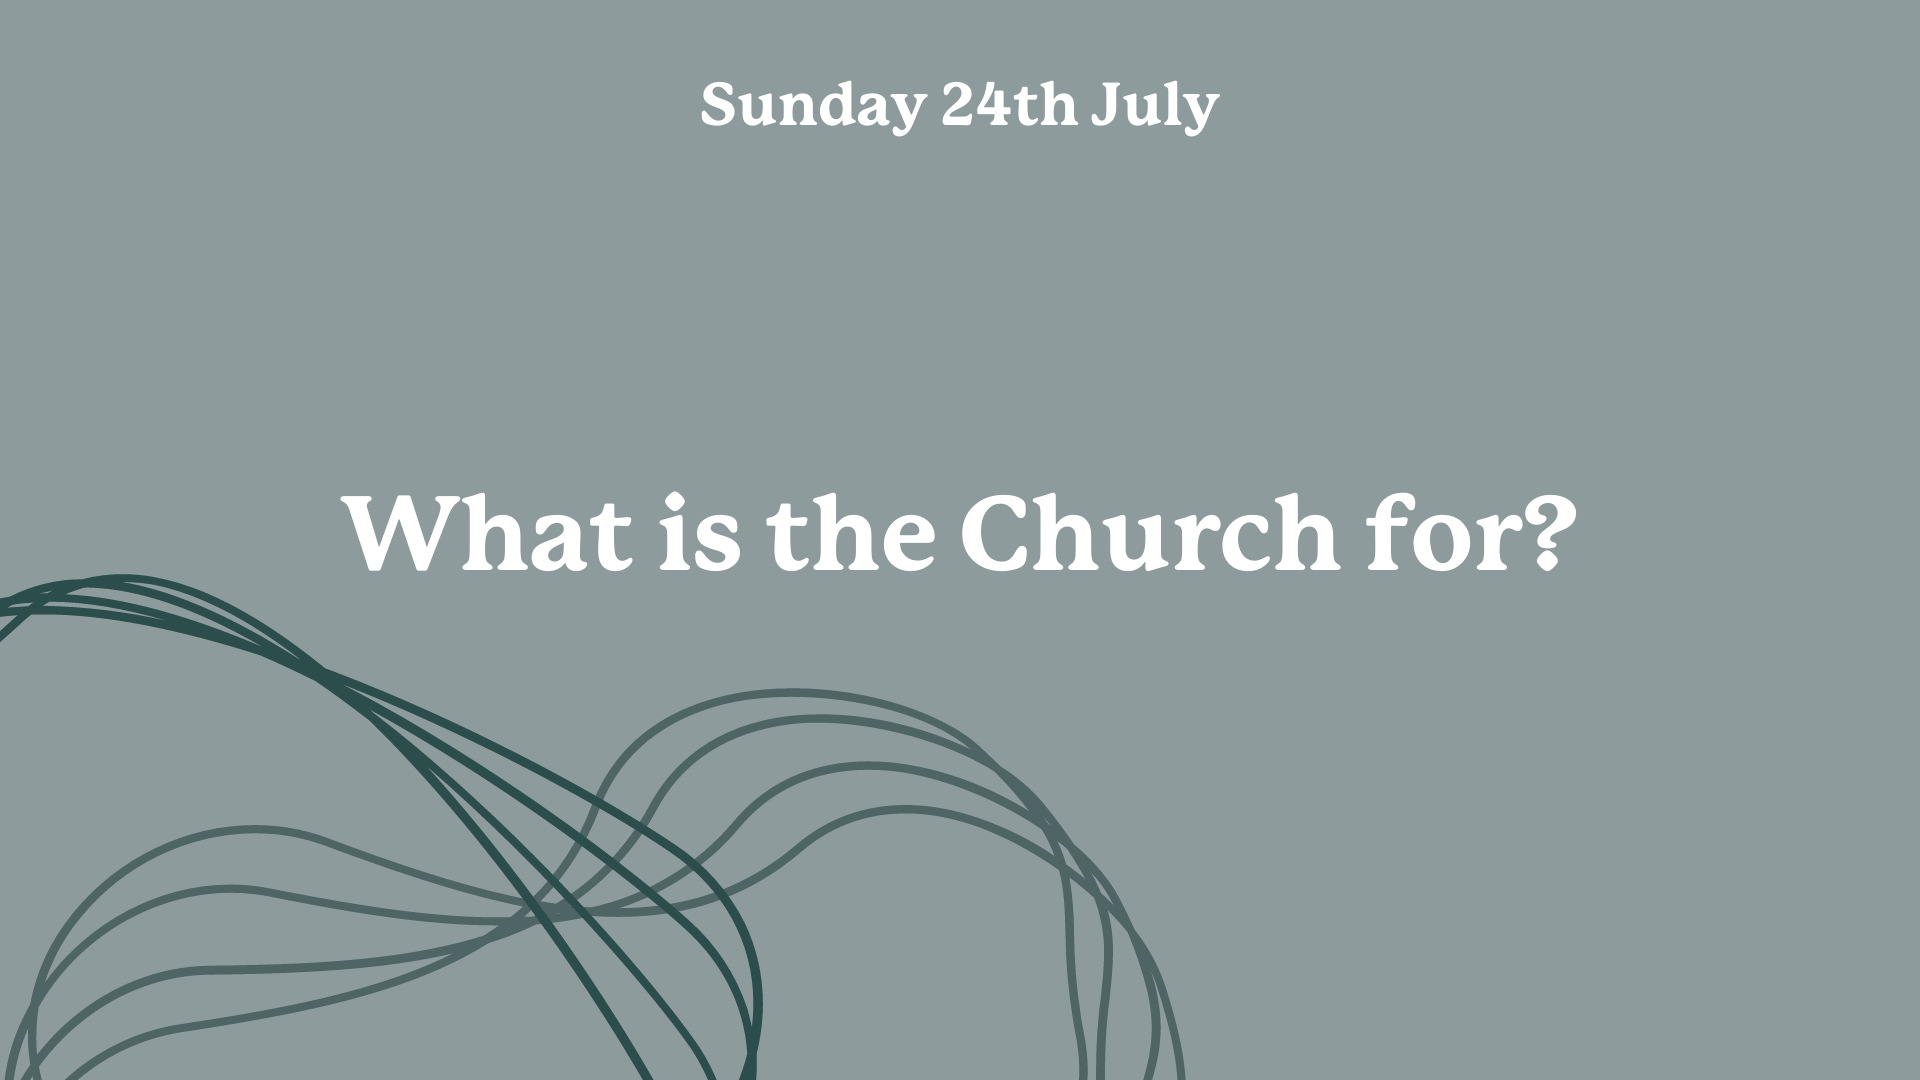 Sunday Service - What is church for?